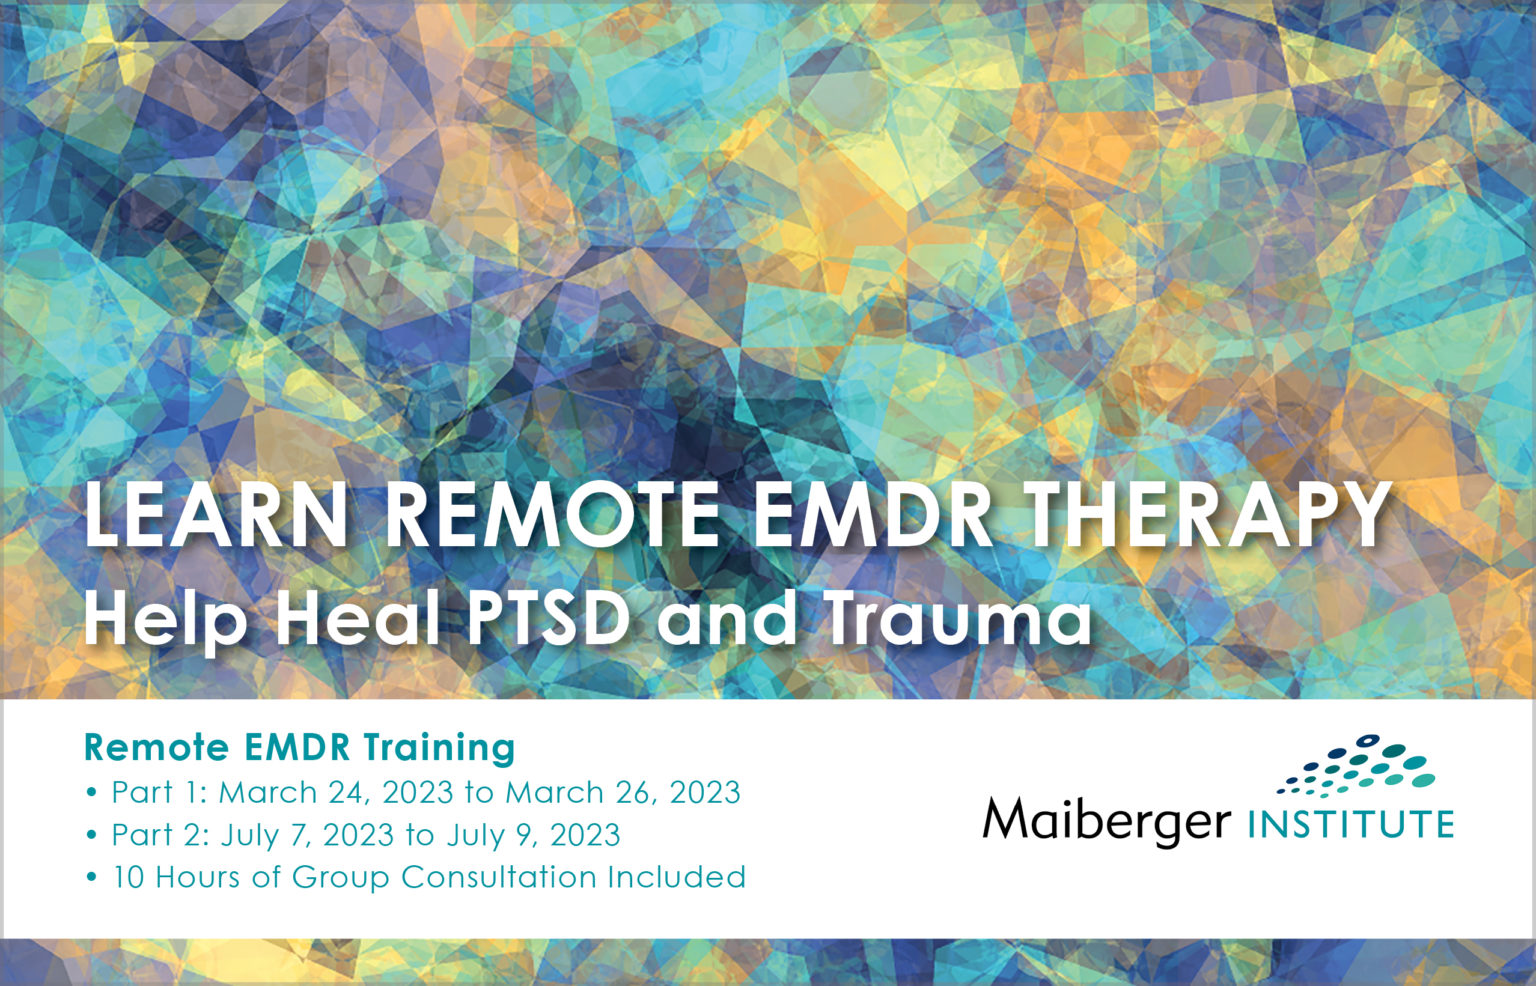 Complete Remote EMDR Training Course Part 1 March 24, 2023 to March